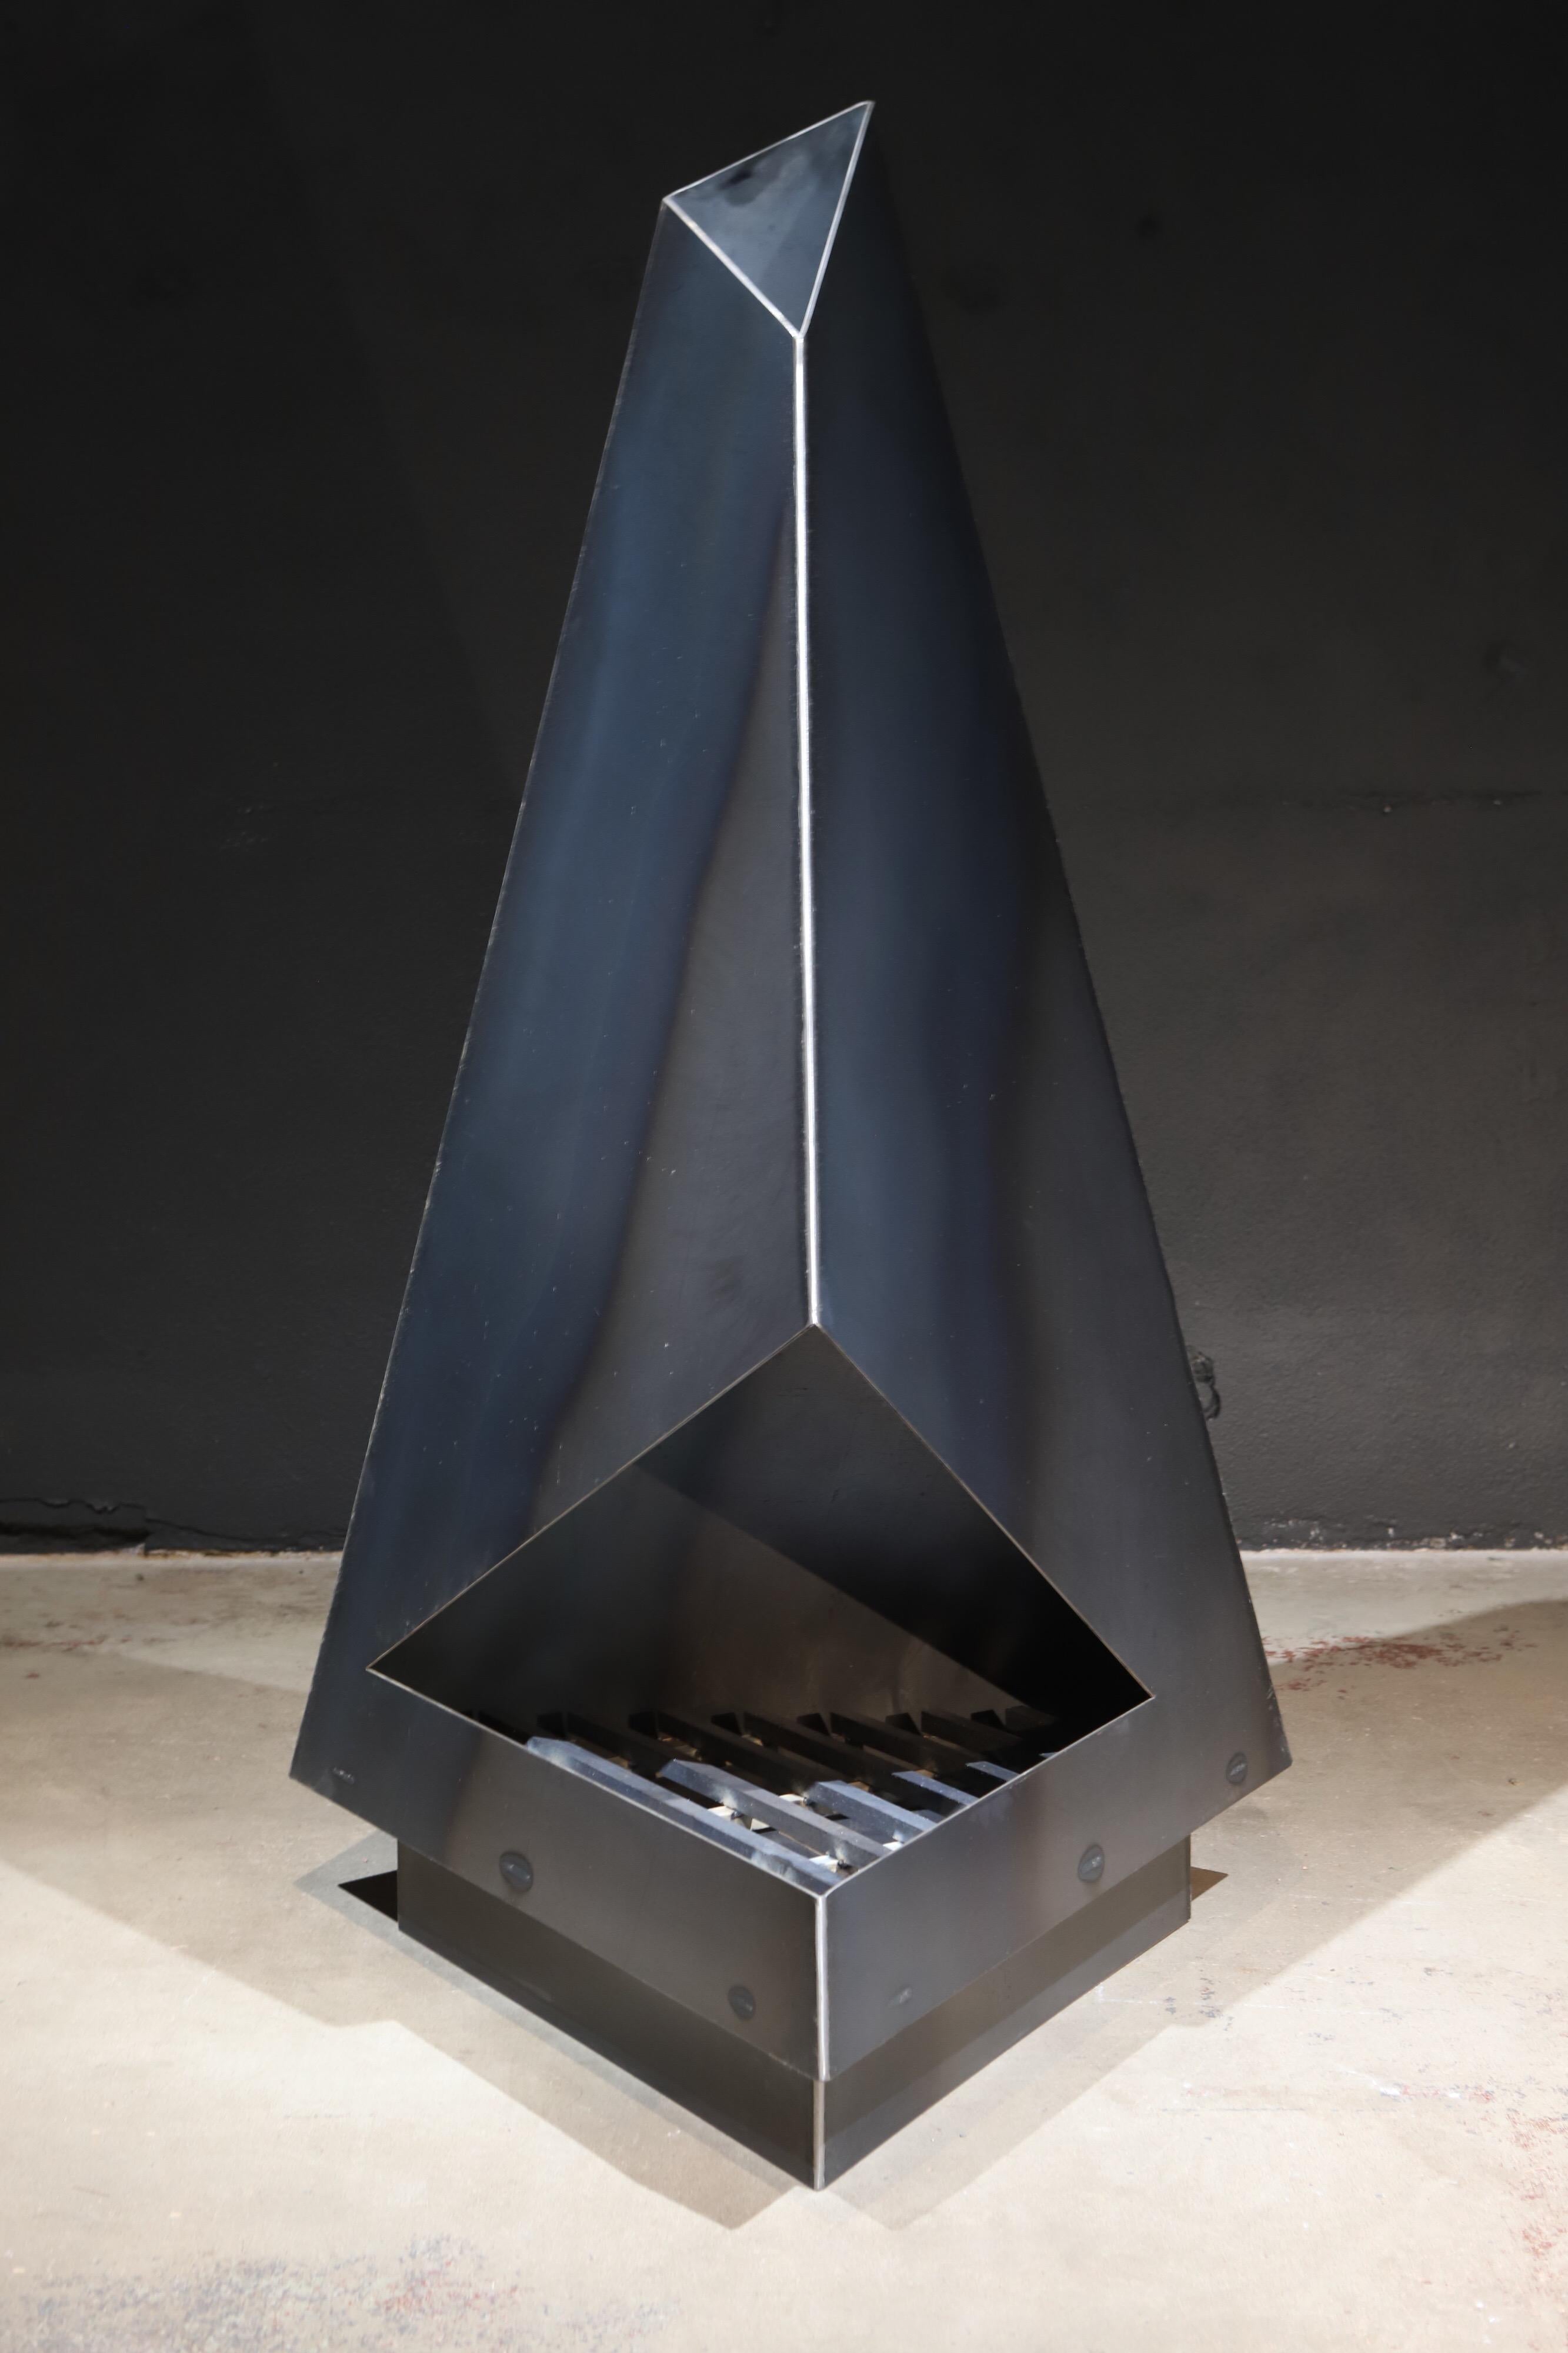 Not your normal chiminea or fireplace. This high design, raw steel sculptural piece will make a statement in any outdoor space. Functionally, it is perfect on that cold evening, but also serves as an amazing art display the remainder of the year.